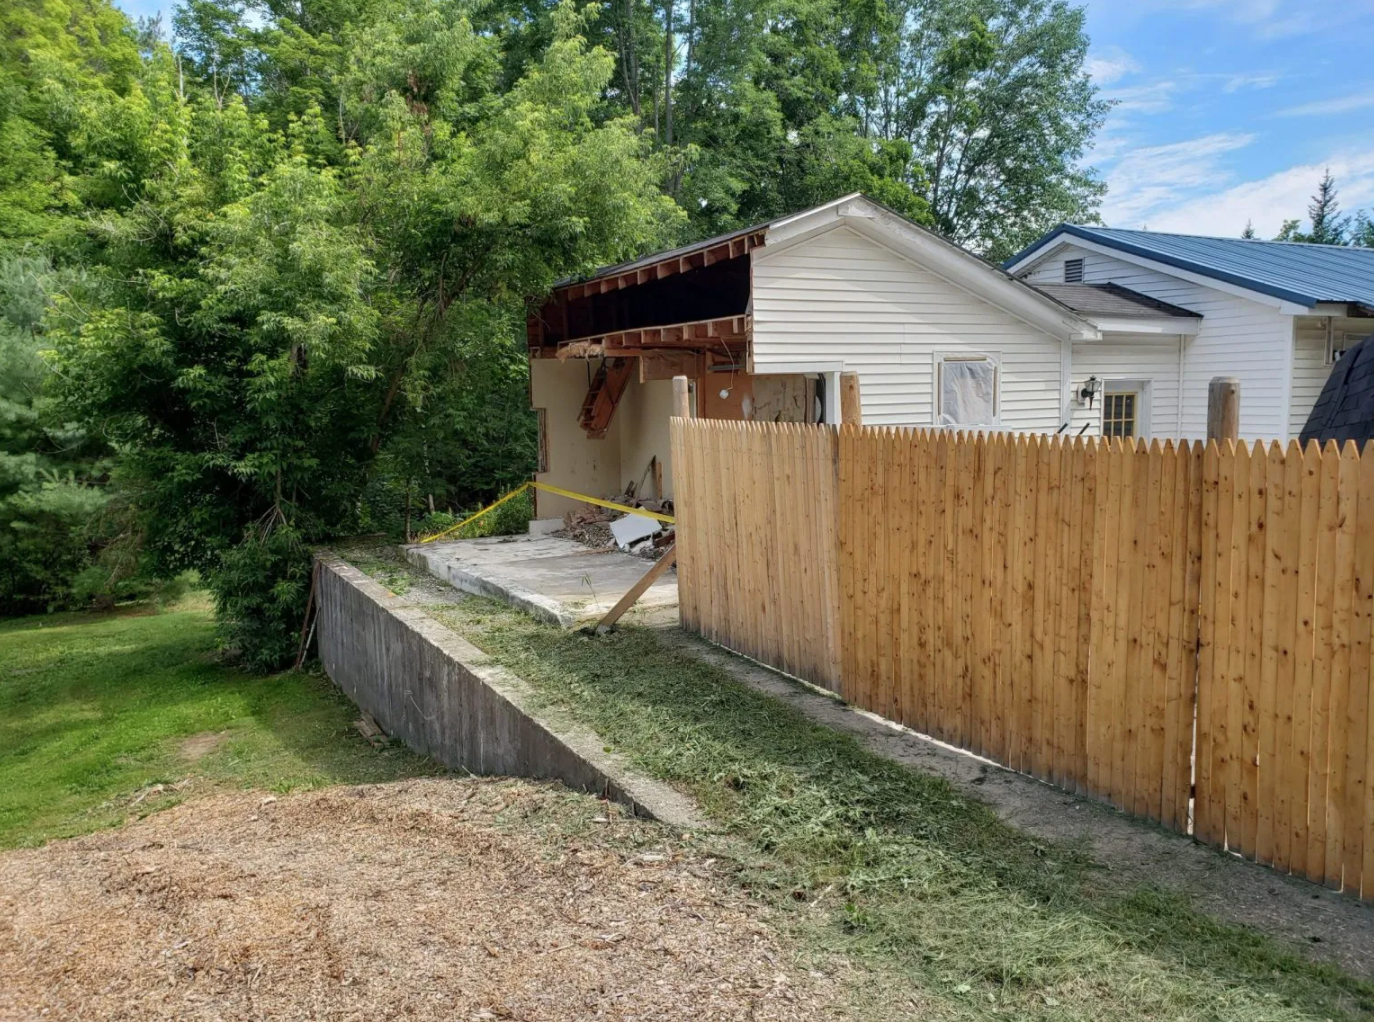 Gabriel Brawn cut his neighbors garage in half after it was deemed on his side of the property line - garage cut in half